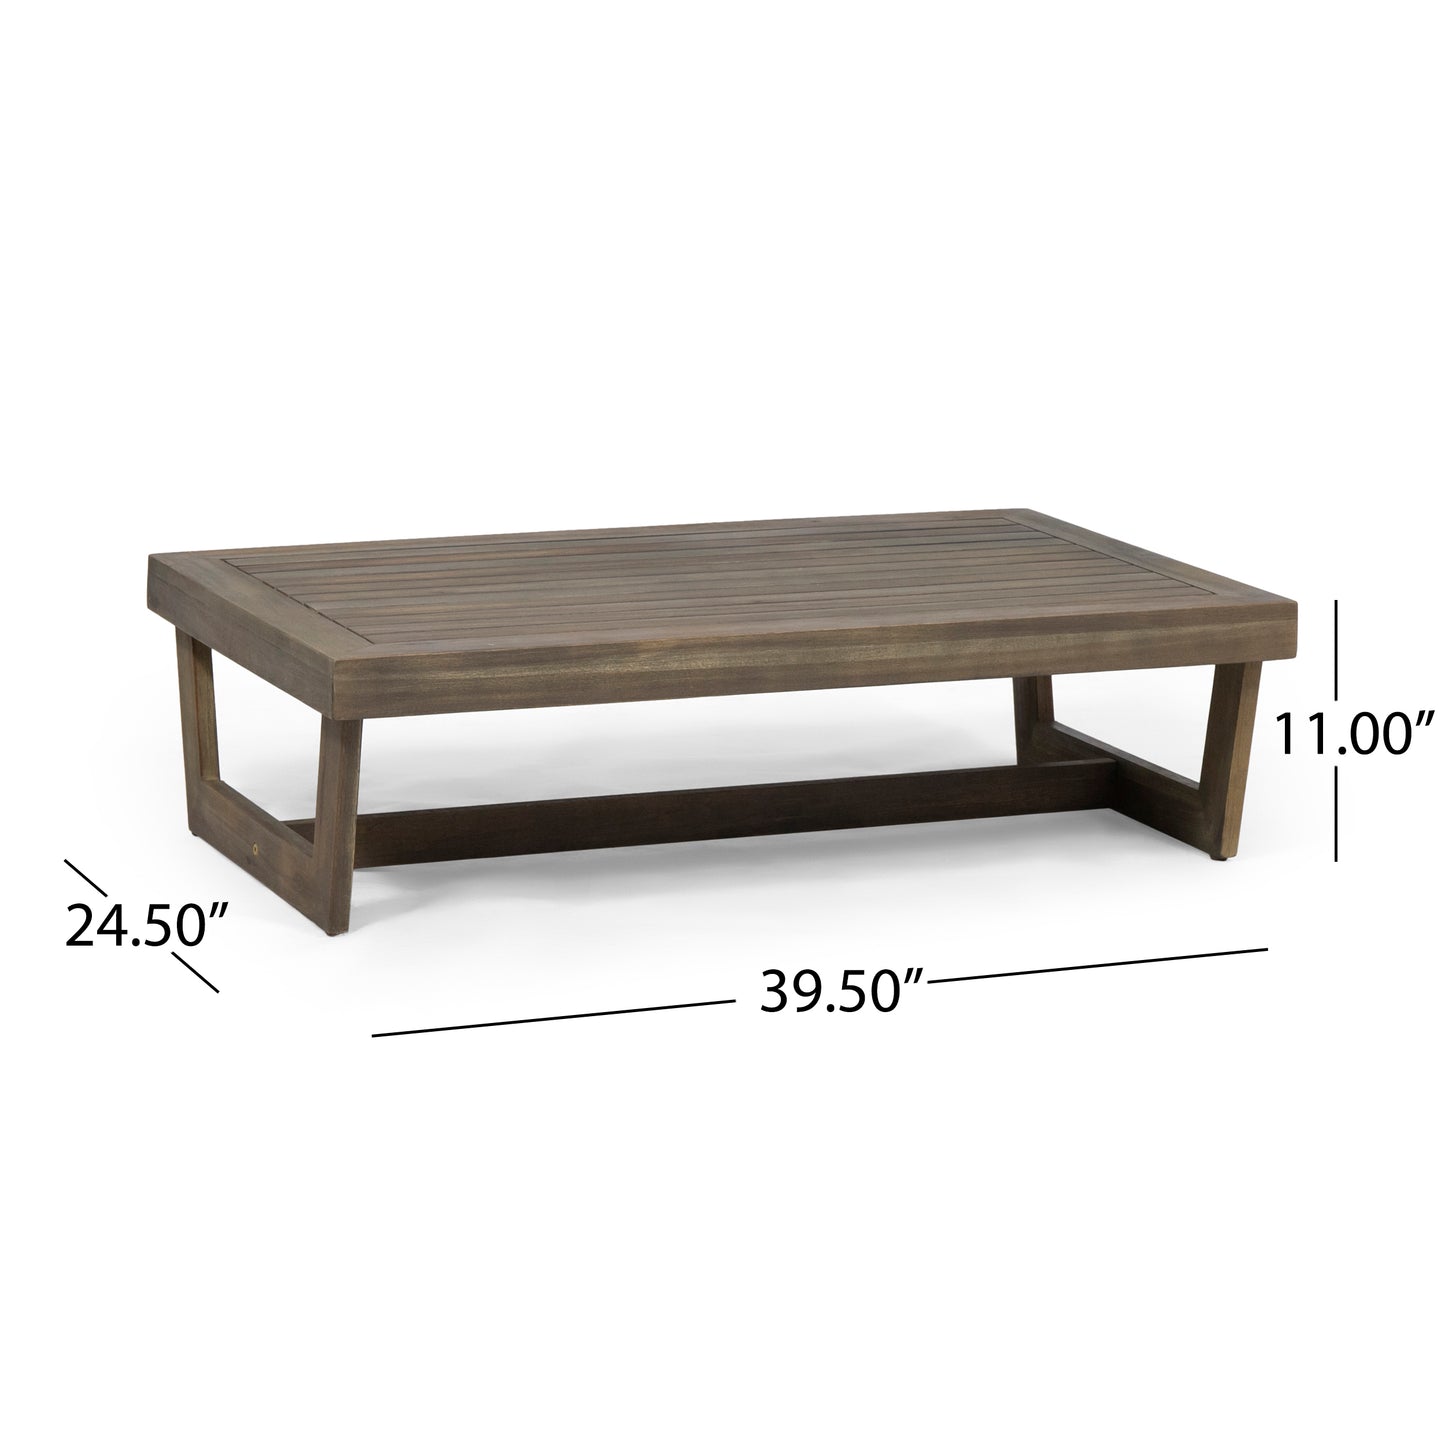 Emma Outdoor 4 Seater Chat Set with Coffee Table